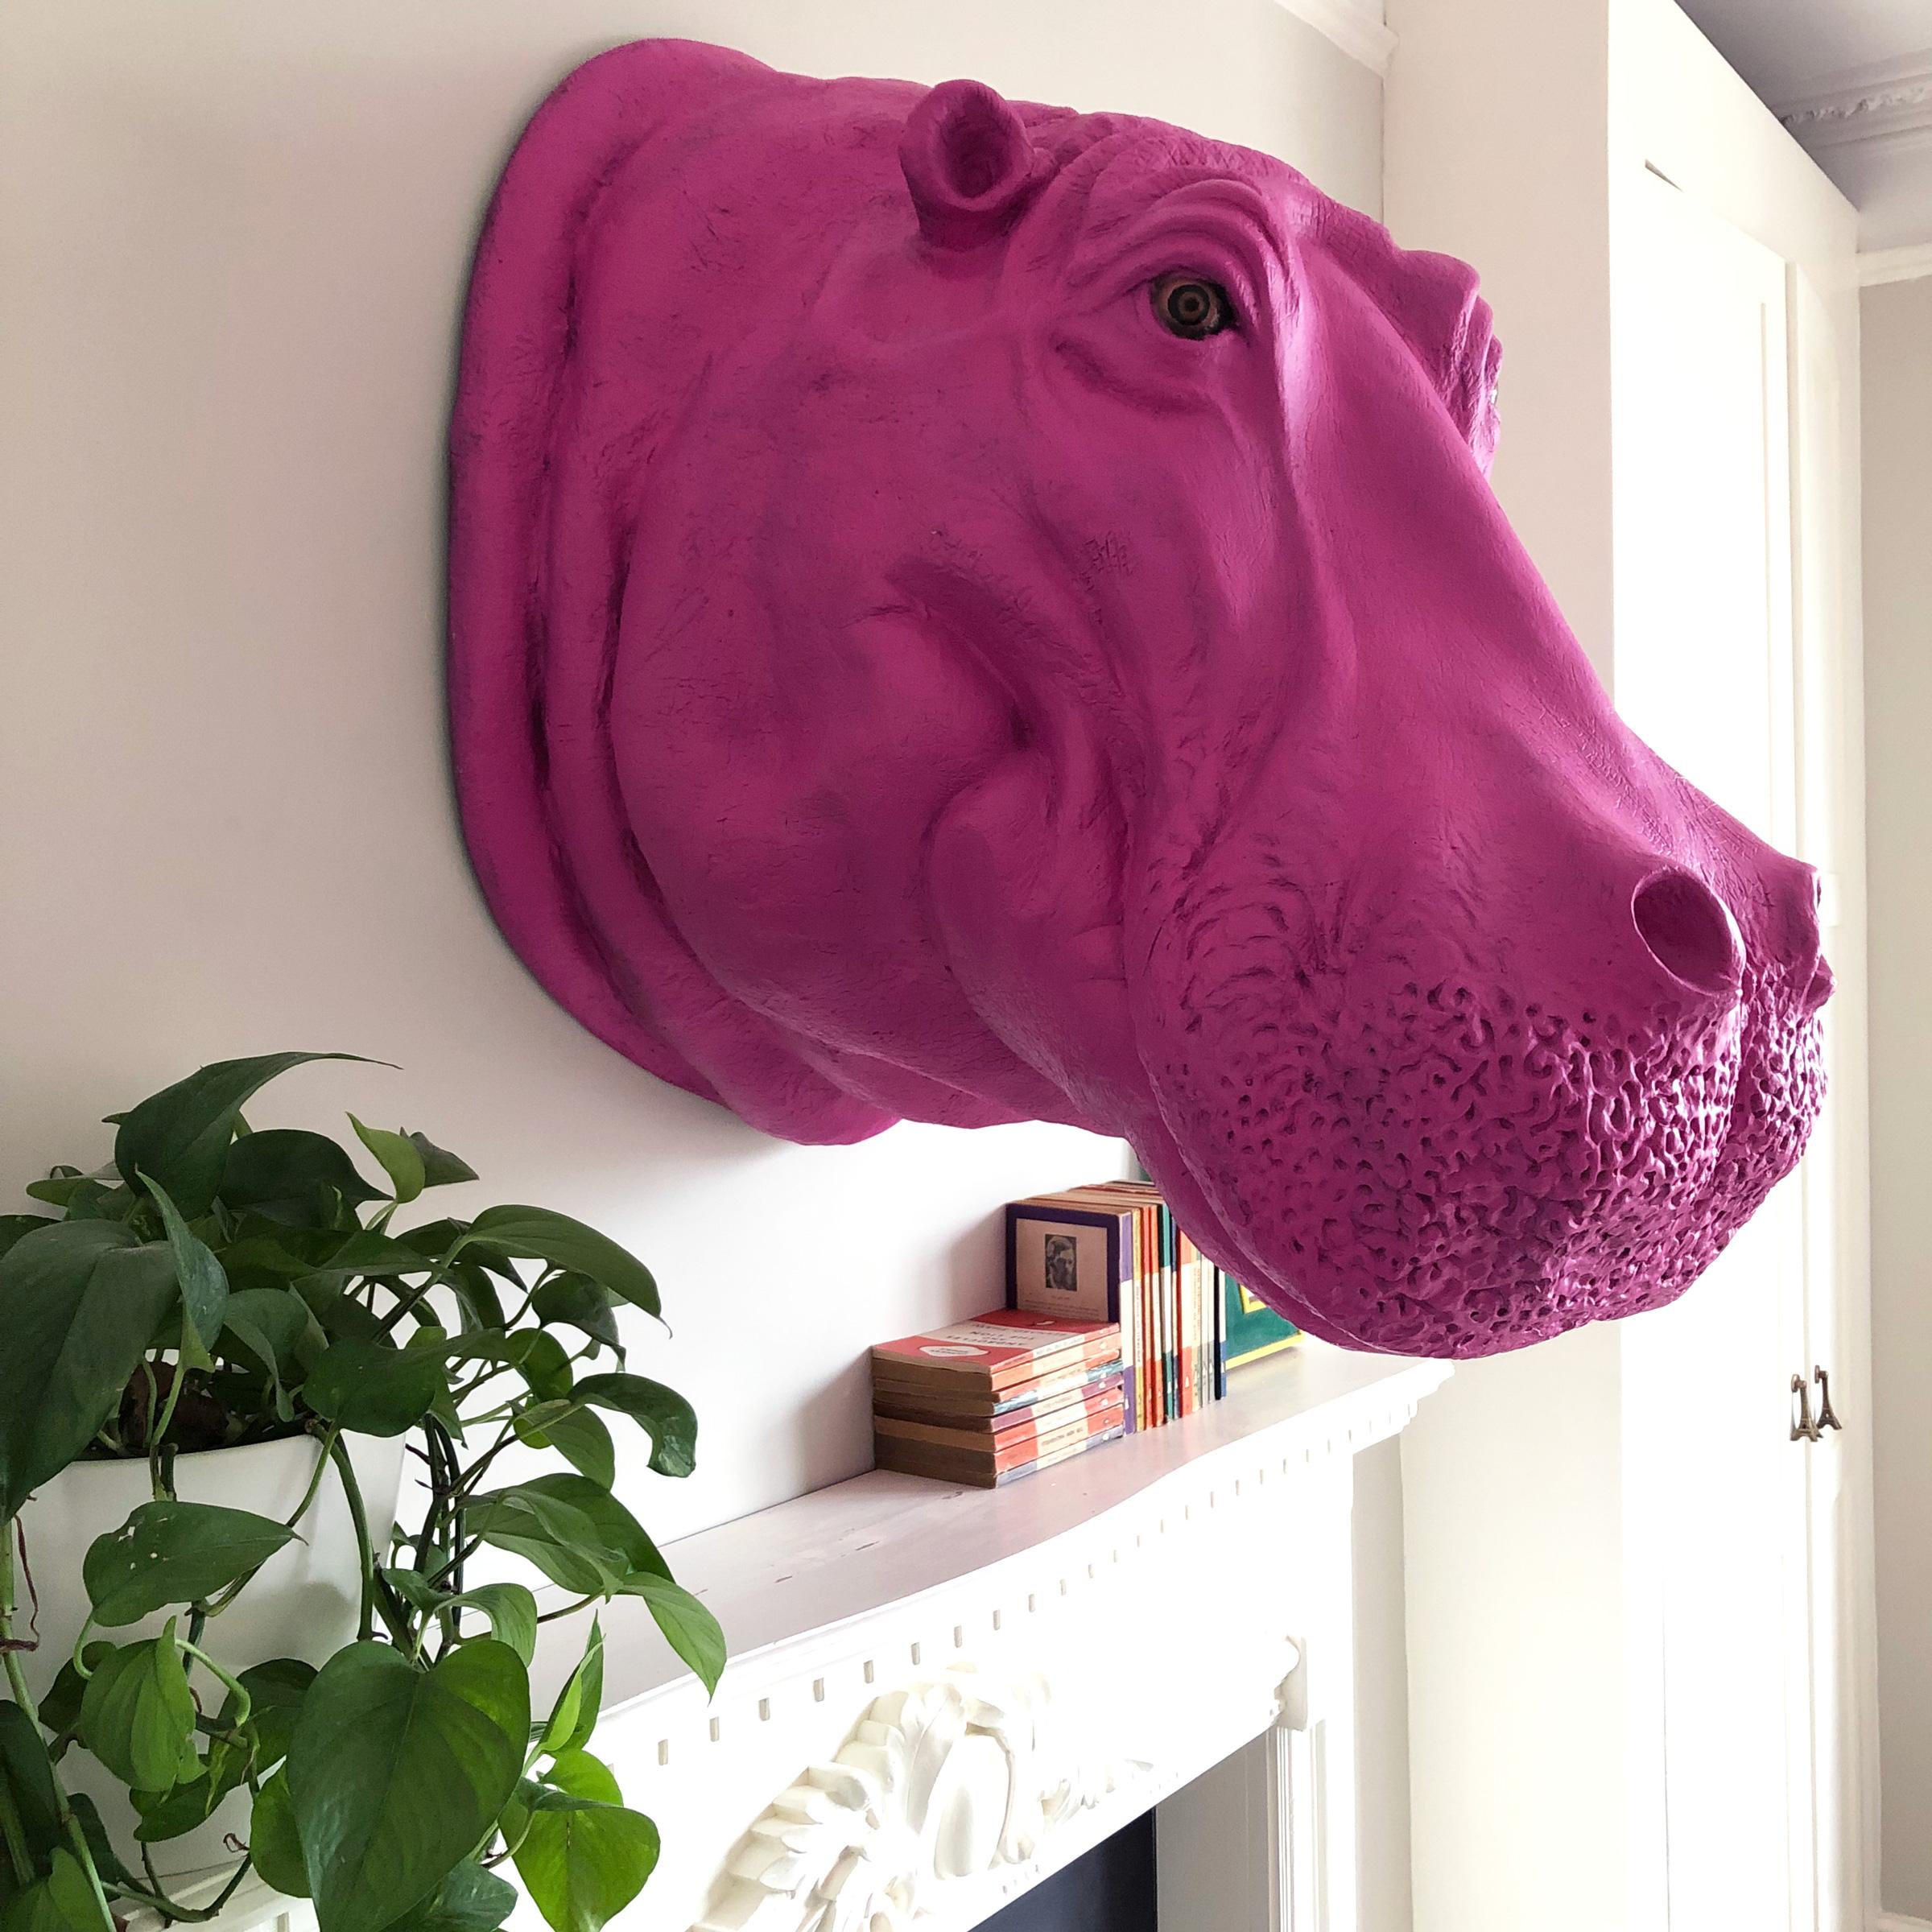 British Vintage Pink Giant Hippo Head For Sale